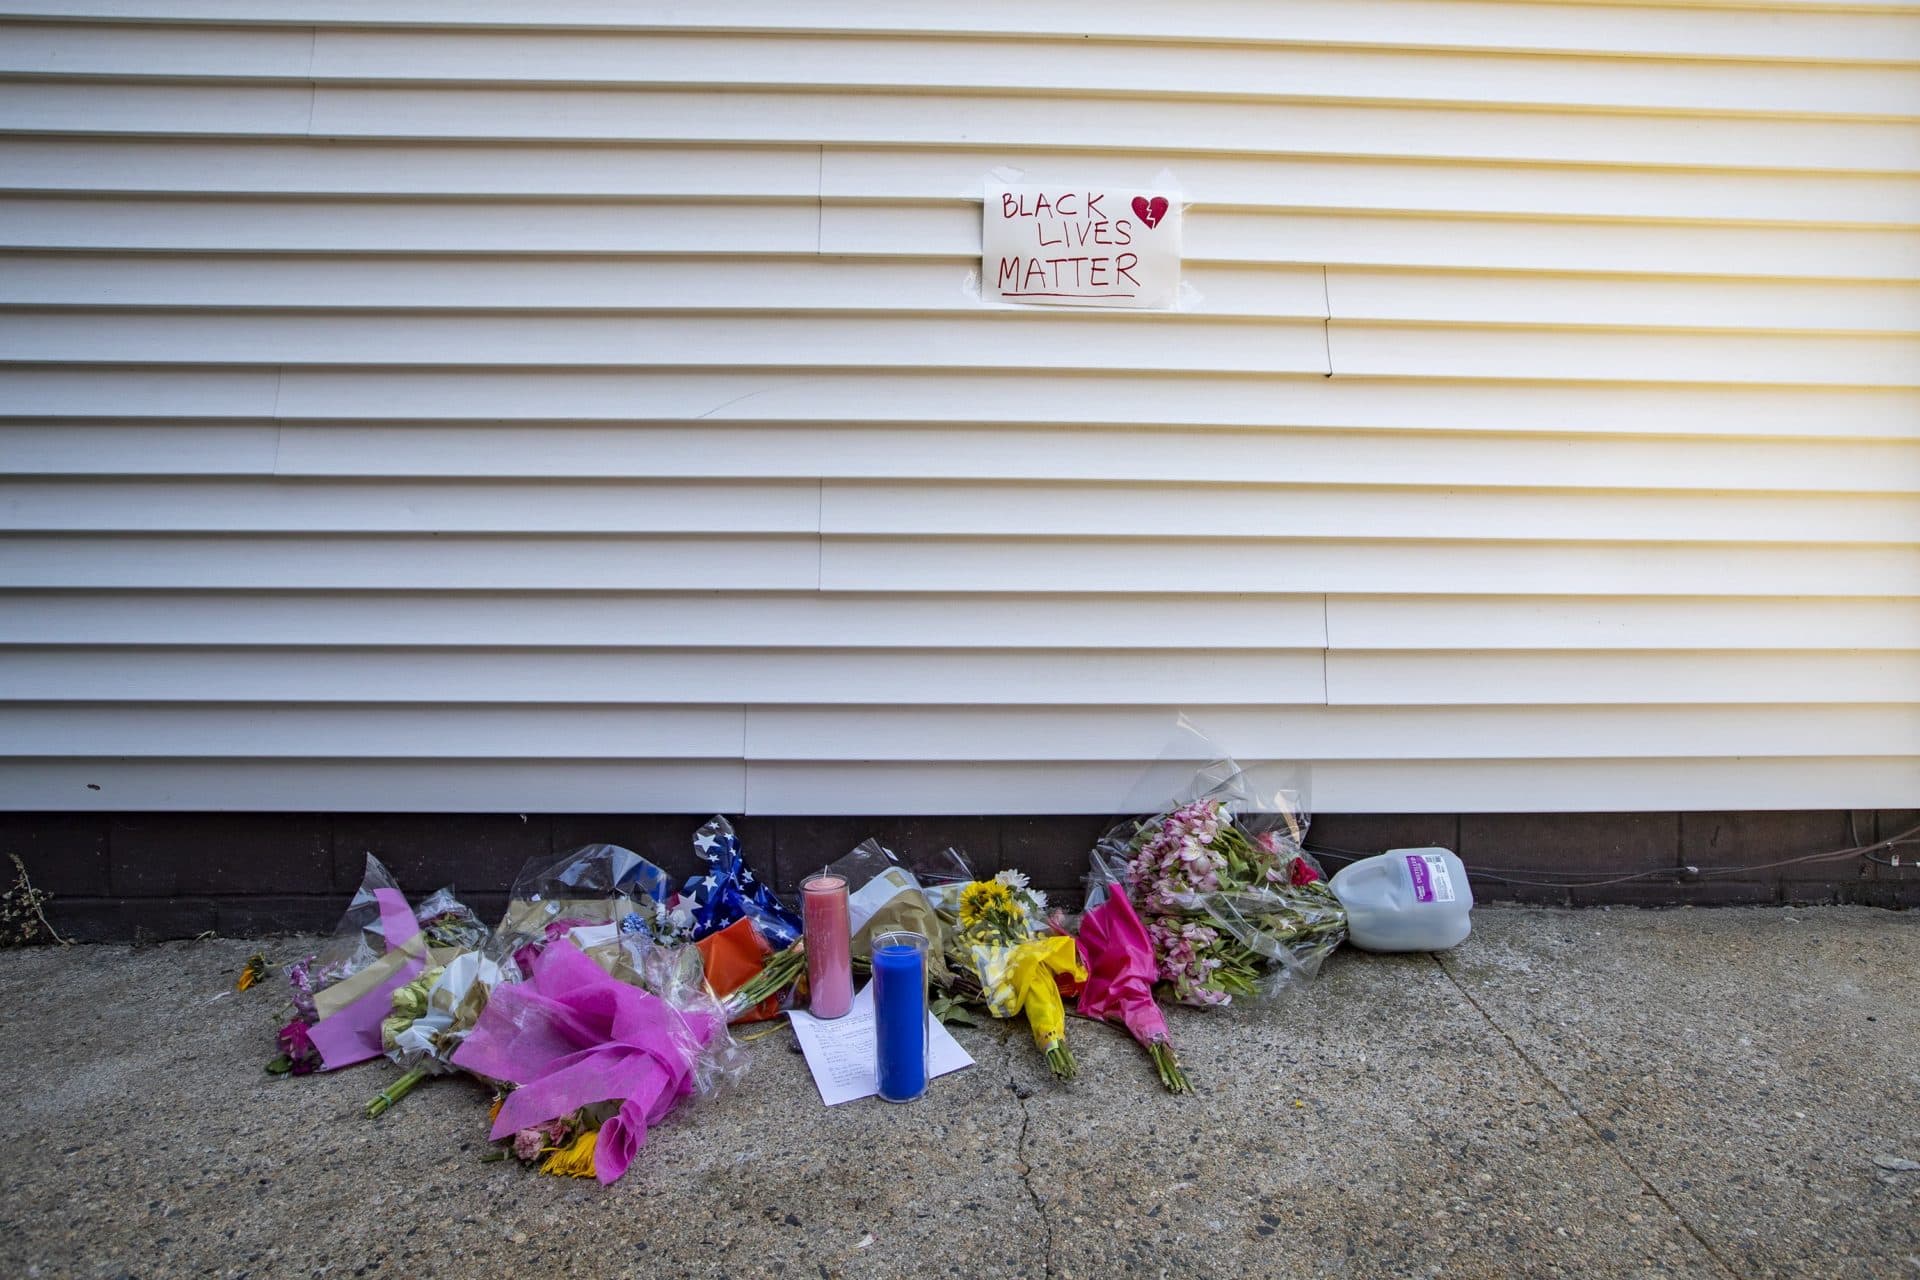 Flowers and candles lay in an alley way off of Shirly Street in Winthrop where retired Massachusetts State Police officer David Green was fatally shot. (Jesse Costa/WBUR)